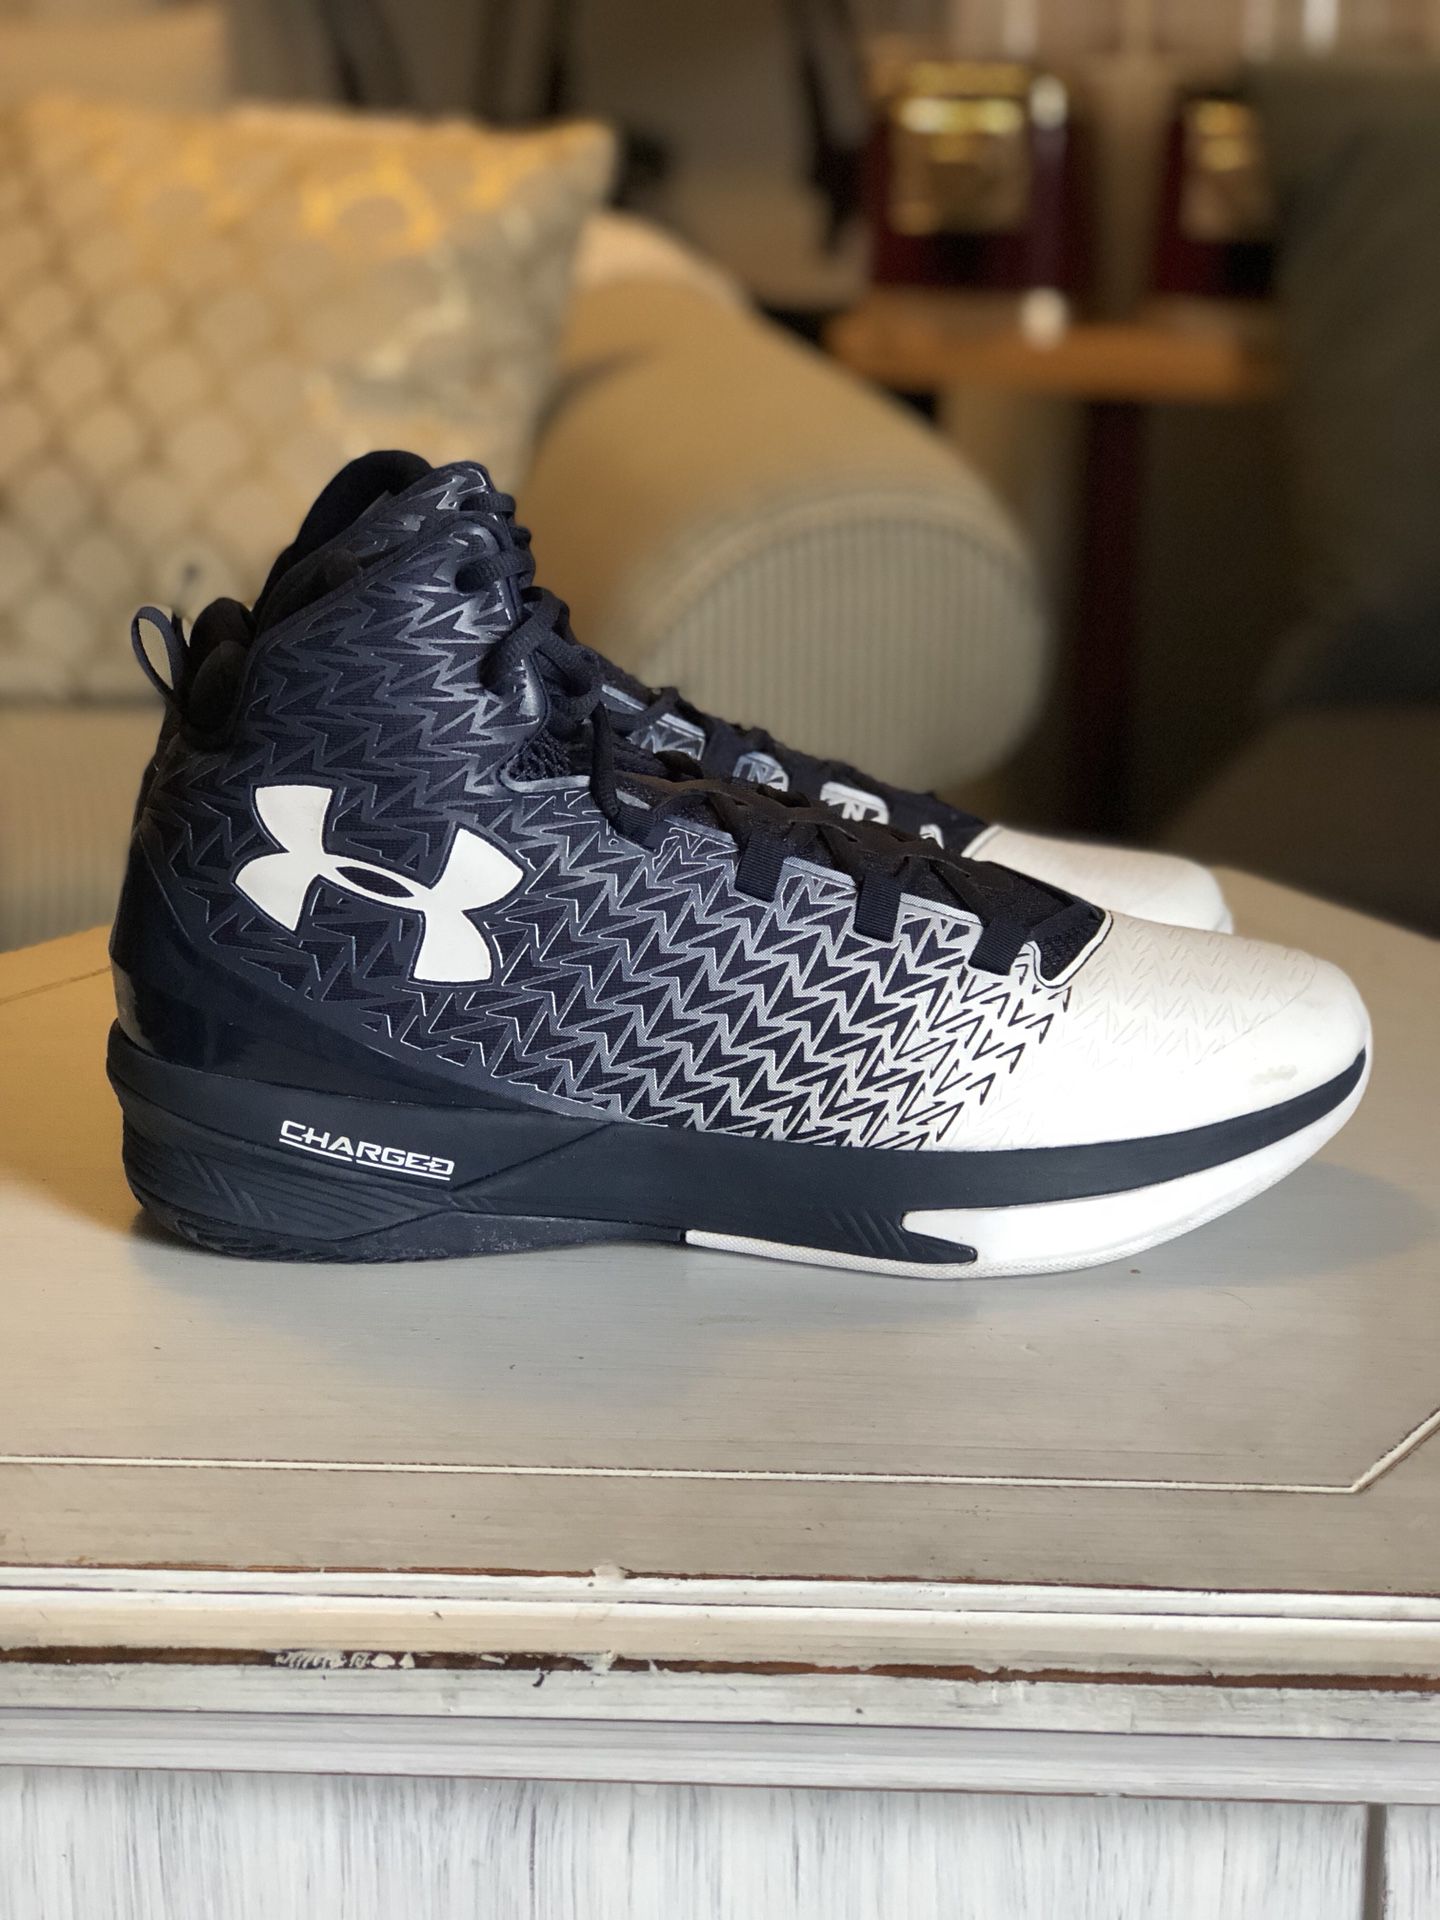 Mens 15 Under Armour Charged Basketball Shoes